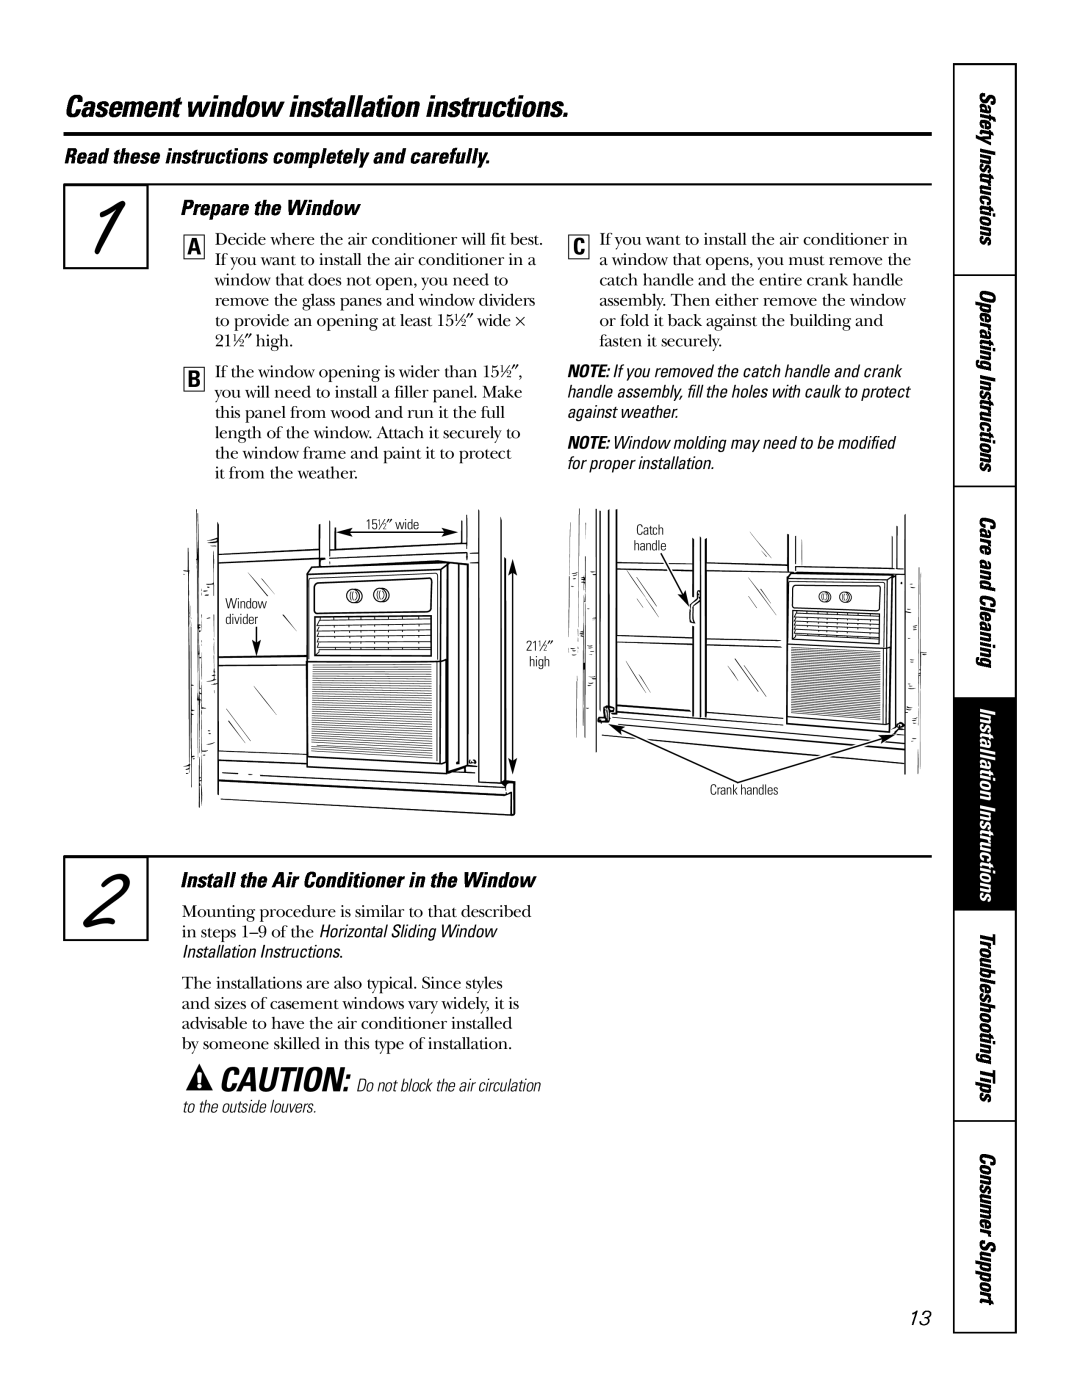 GE AGX08 AGX10 Casement window installation instructions, Prepare the Window, Care and Cleaning Installation, Safety 